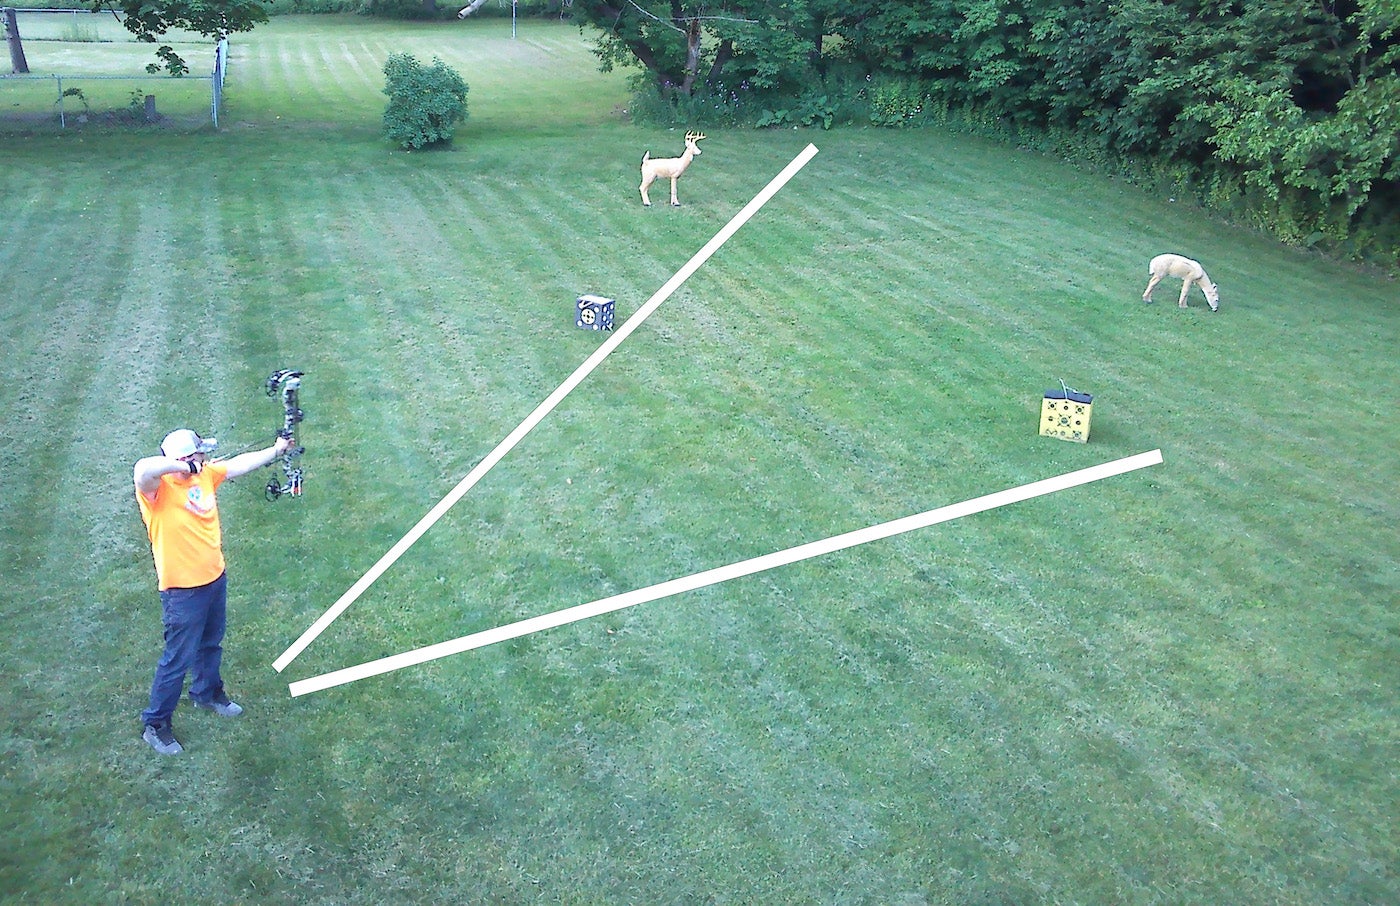 A man archery four targets in his backyard.